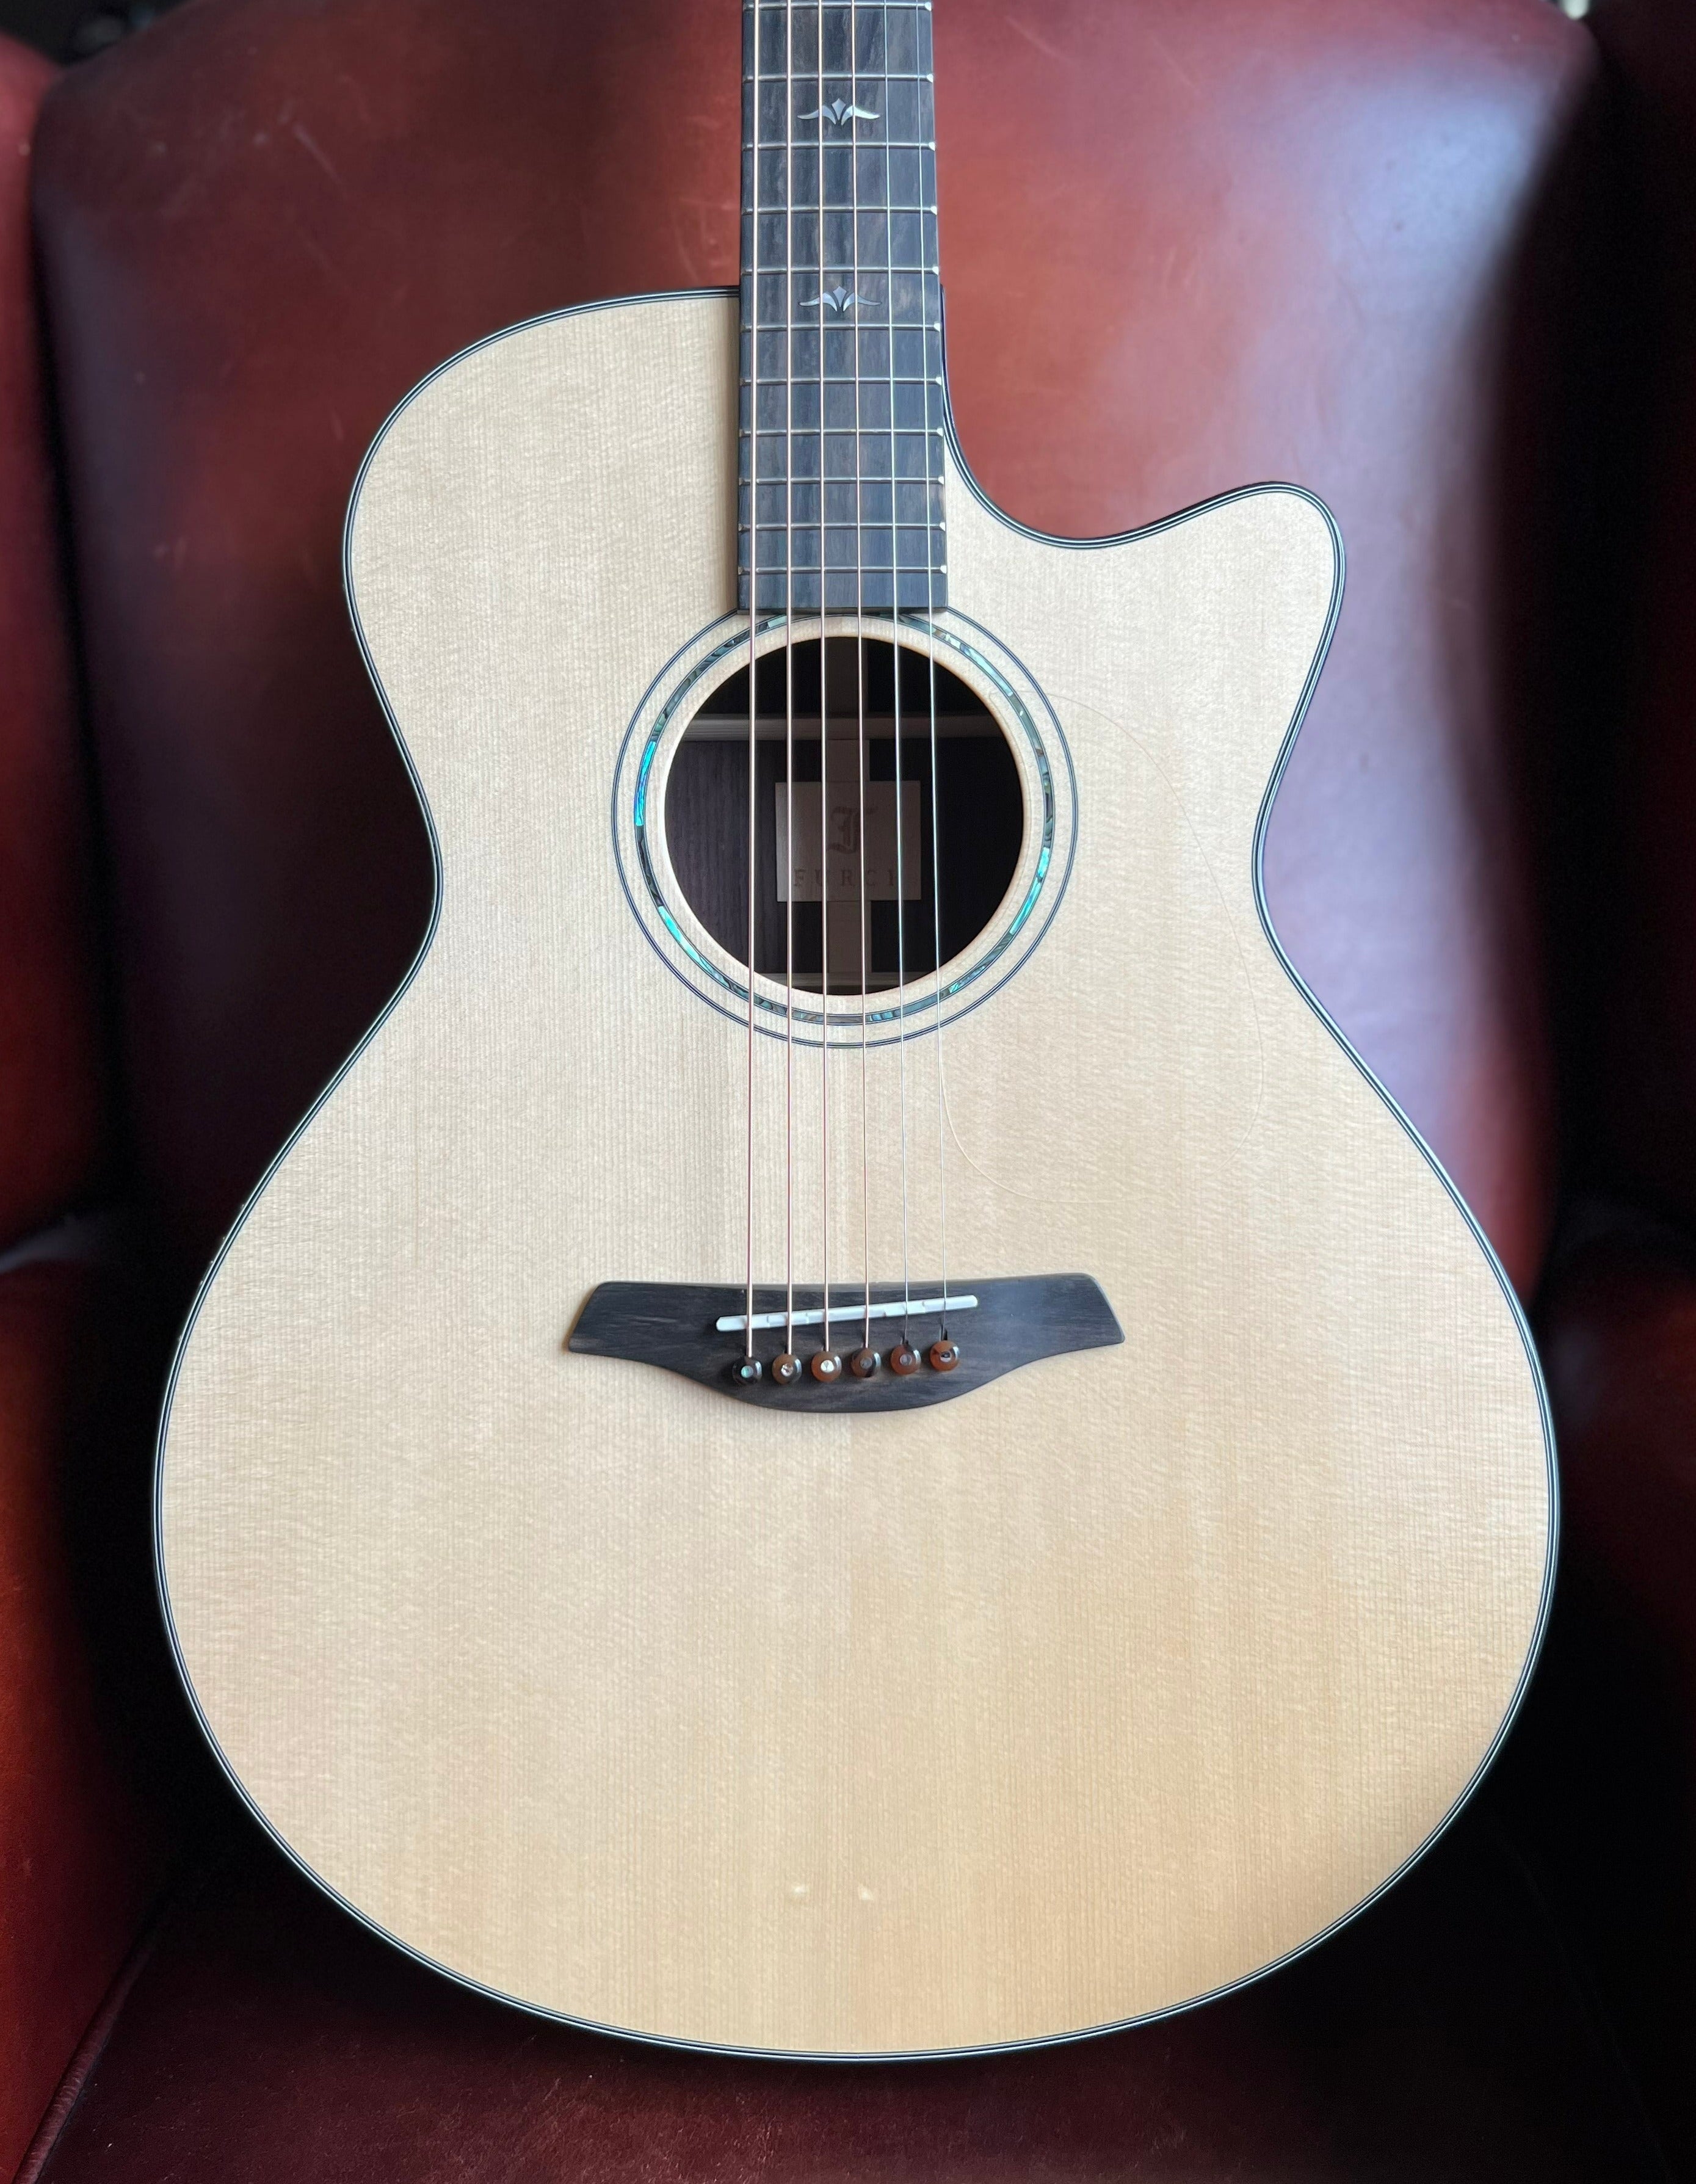 Furch Yellow Gc-SR Grand Auditorium (cutaway) Acoustic Guitar (With Option Of Original G23CR  Inlays - A Worldwde No Cost Exclusive), Amplification for sale at Richards Guitars.